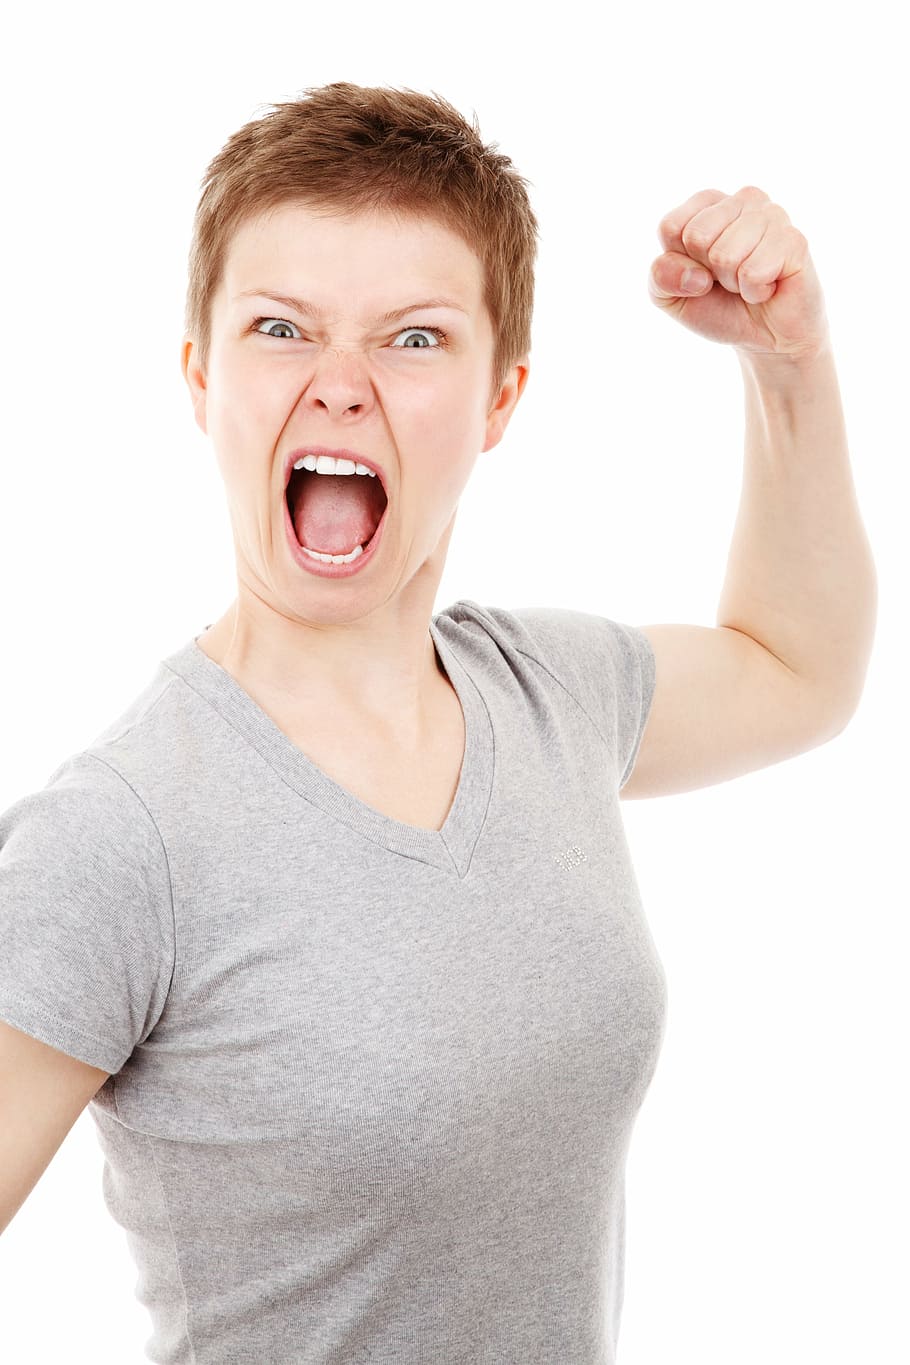 women, wearing, gray, v-neck t-shirt, anger, angry, bad, isolated, dangerous, emotion